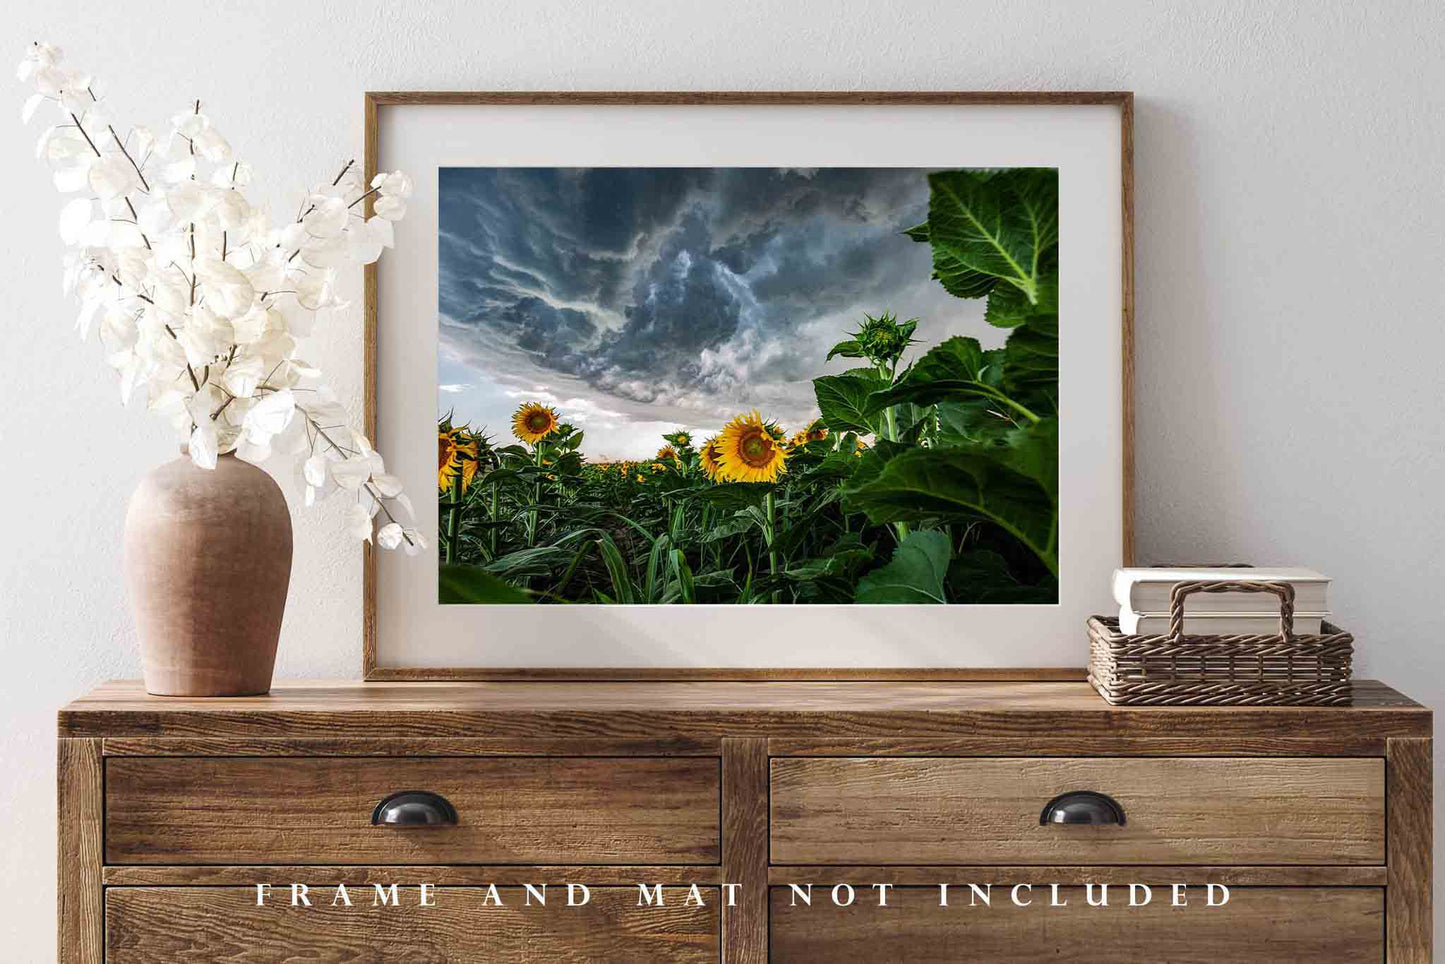 Nature Photography Print - Picture of Sunflowers Under Storm Clouds on Summer Day in Kansas - Country Farmhouse Photo Artwork Decor